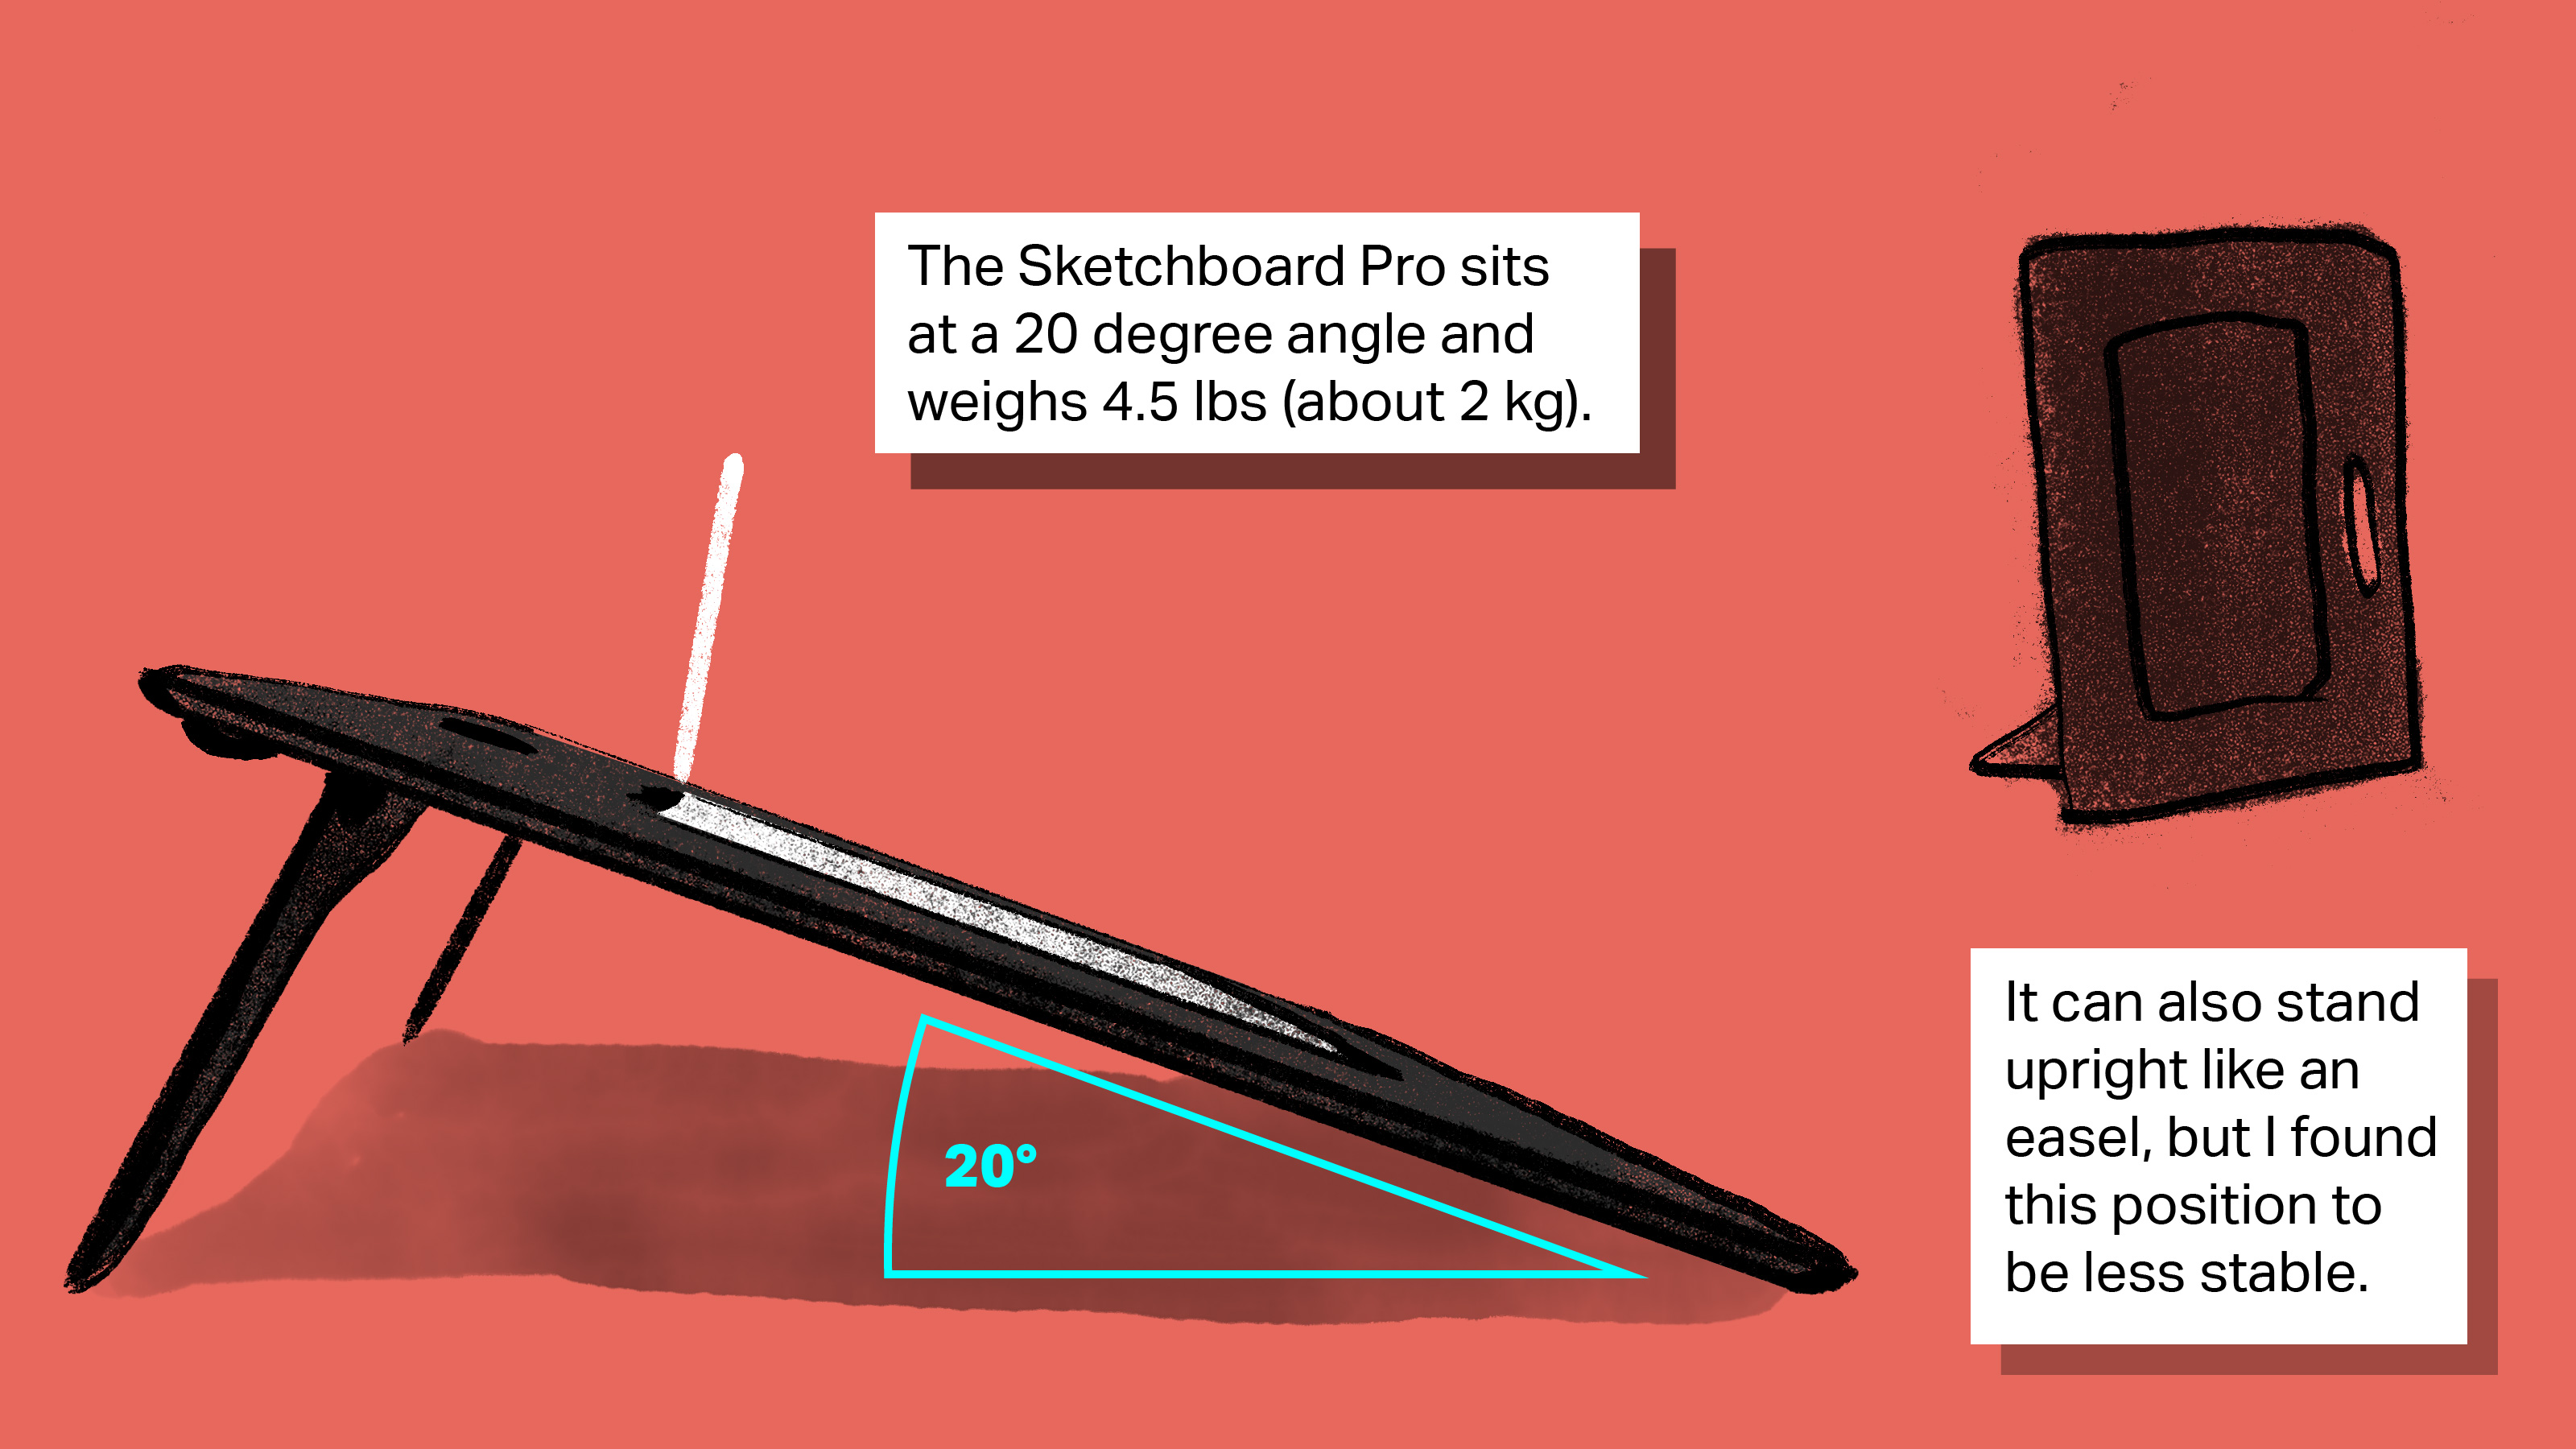 [text] The Sketchboard Pro sits at a 20 degree angle and weighs 4.5 lbs (about 2 kg). It can also stand upright like an easel, but I found this position to be less stable. [image: side views of the Sketchboard Pro to demonstrate a 20 degree angle]